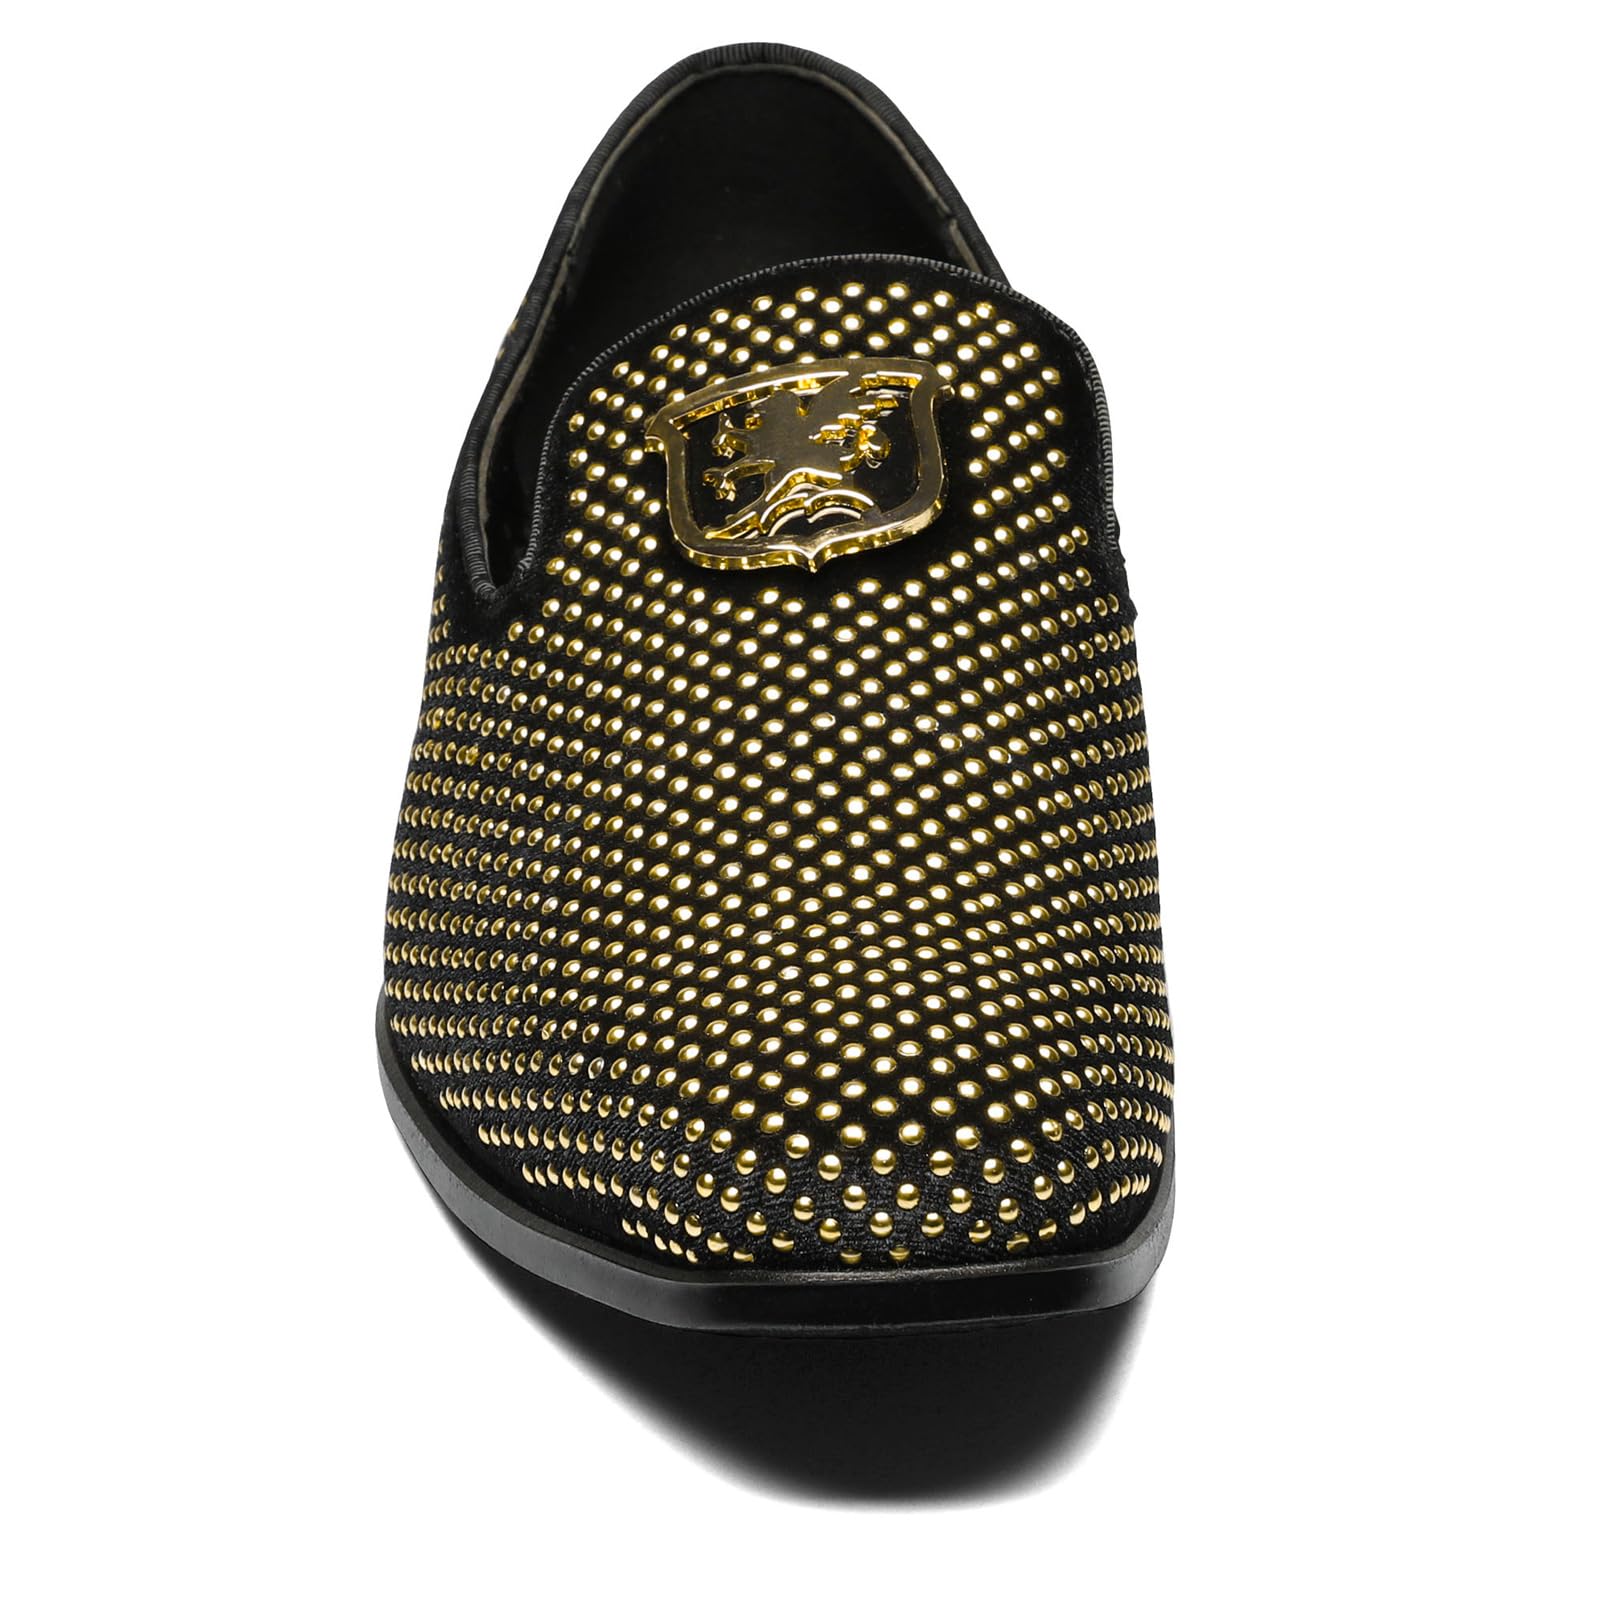 STACY ADAMS Men's Swagger Studded Ornament Slip-on Driving Style Loafer